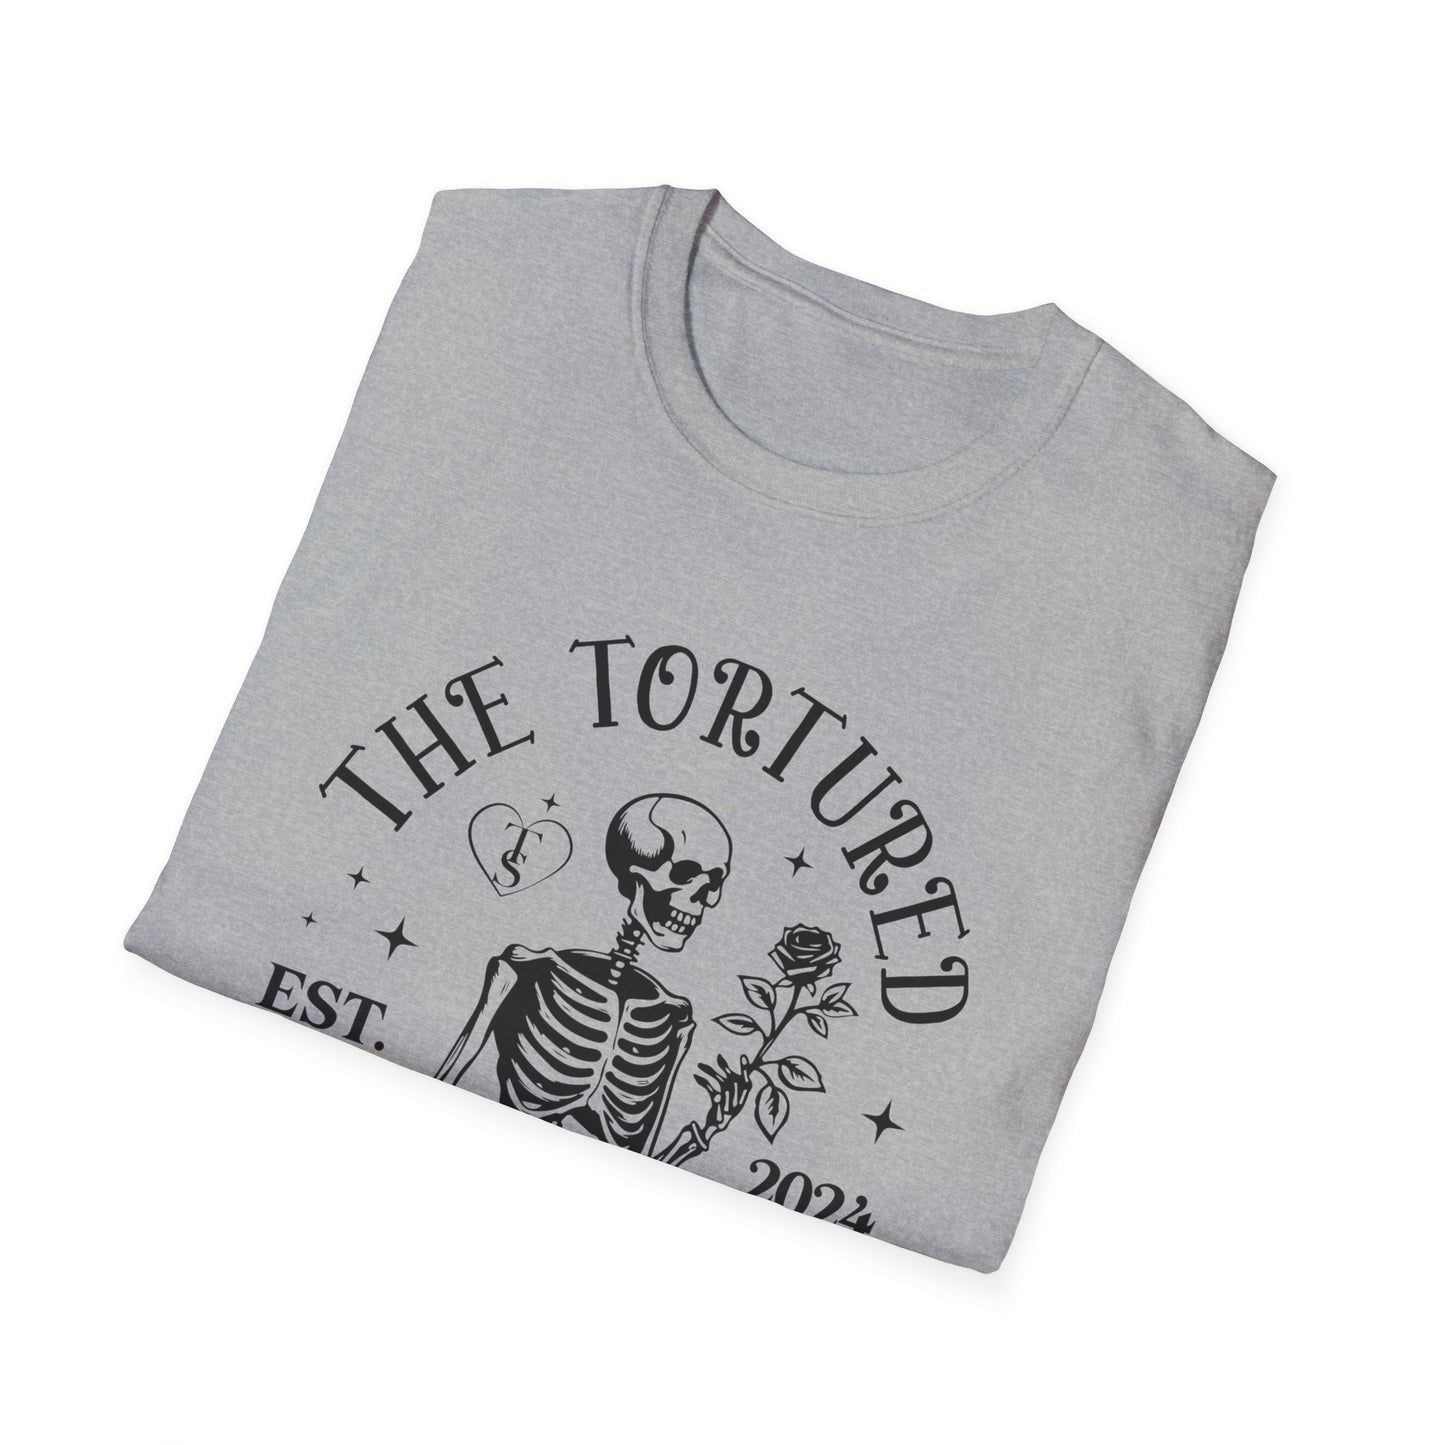 The Tortured Poet - Unisex Softstyle T-Shirt